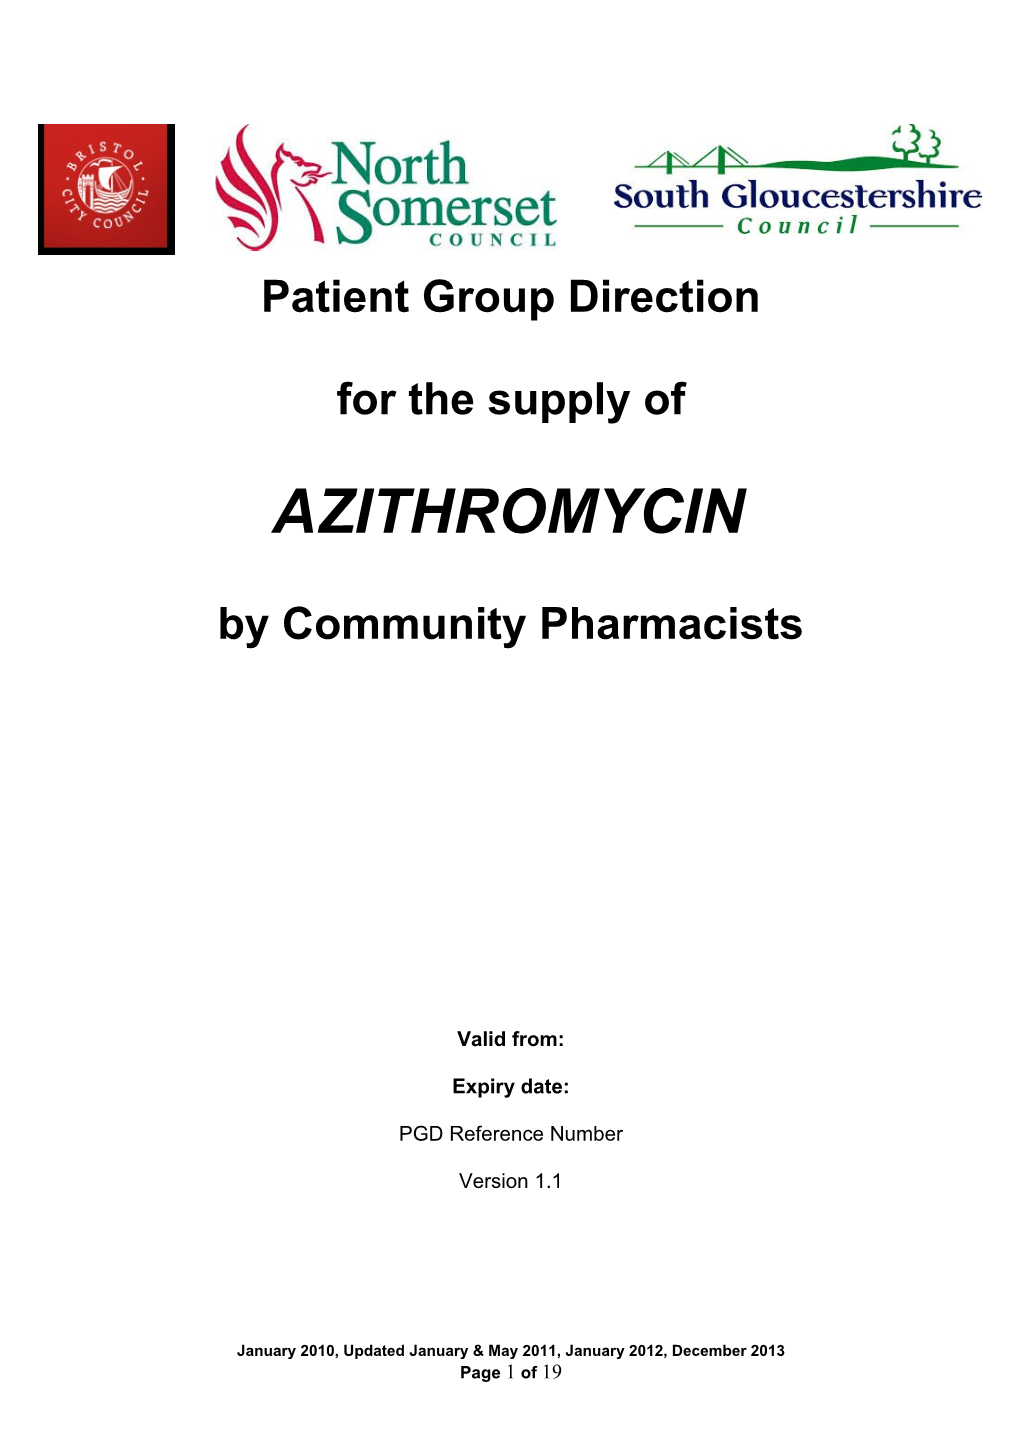 Clinical Content of Patient Group Direction For